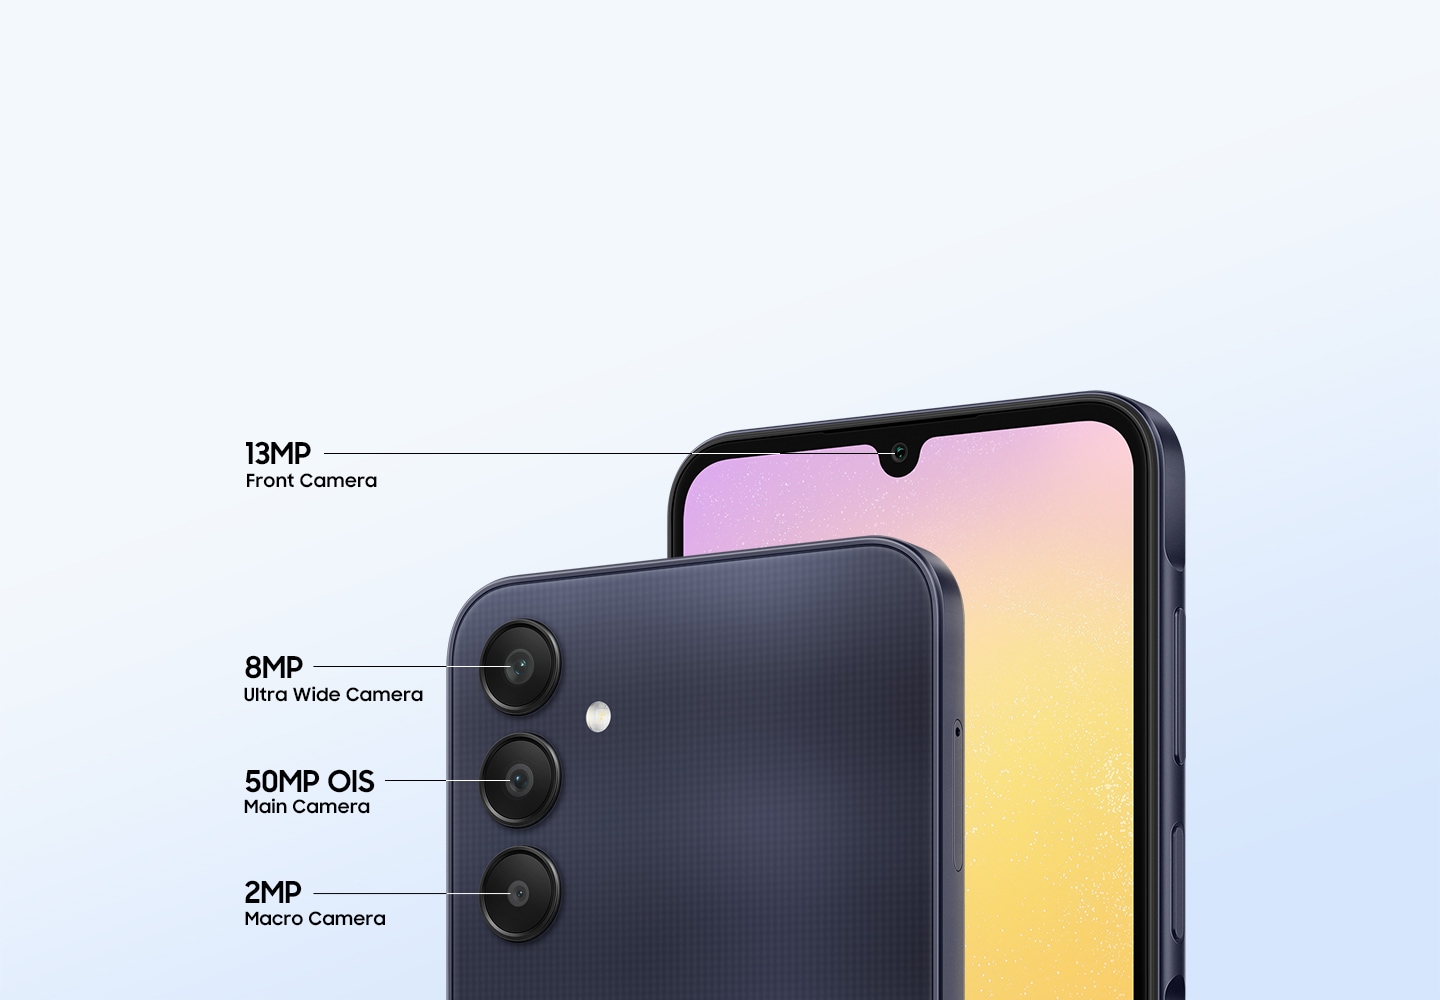 The front and back of the Galaxy A25 5G are shown to showcase its four multiple cameras including the 13MP Front Camera, the 8MP Ultra Wide Camera, the 50MP OIS Main Camera and the 2MP Macro Camera.